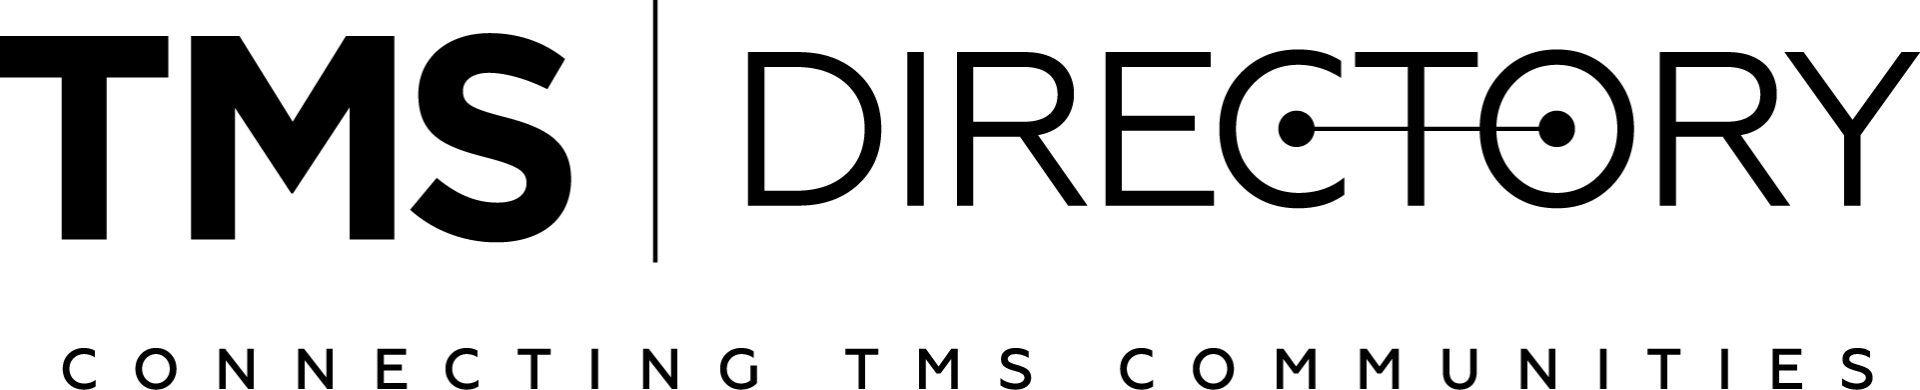 tms clinic directory, tms directory